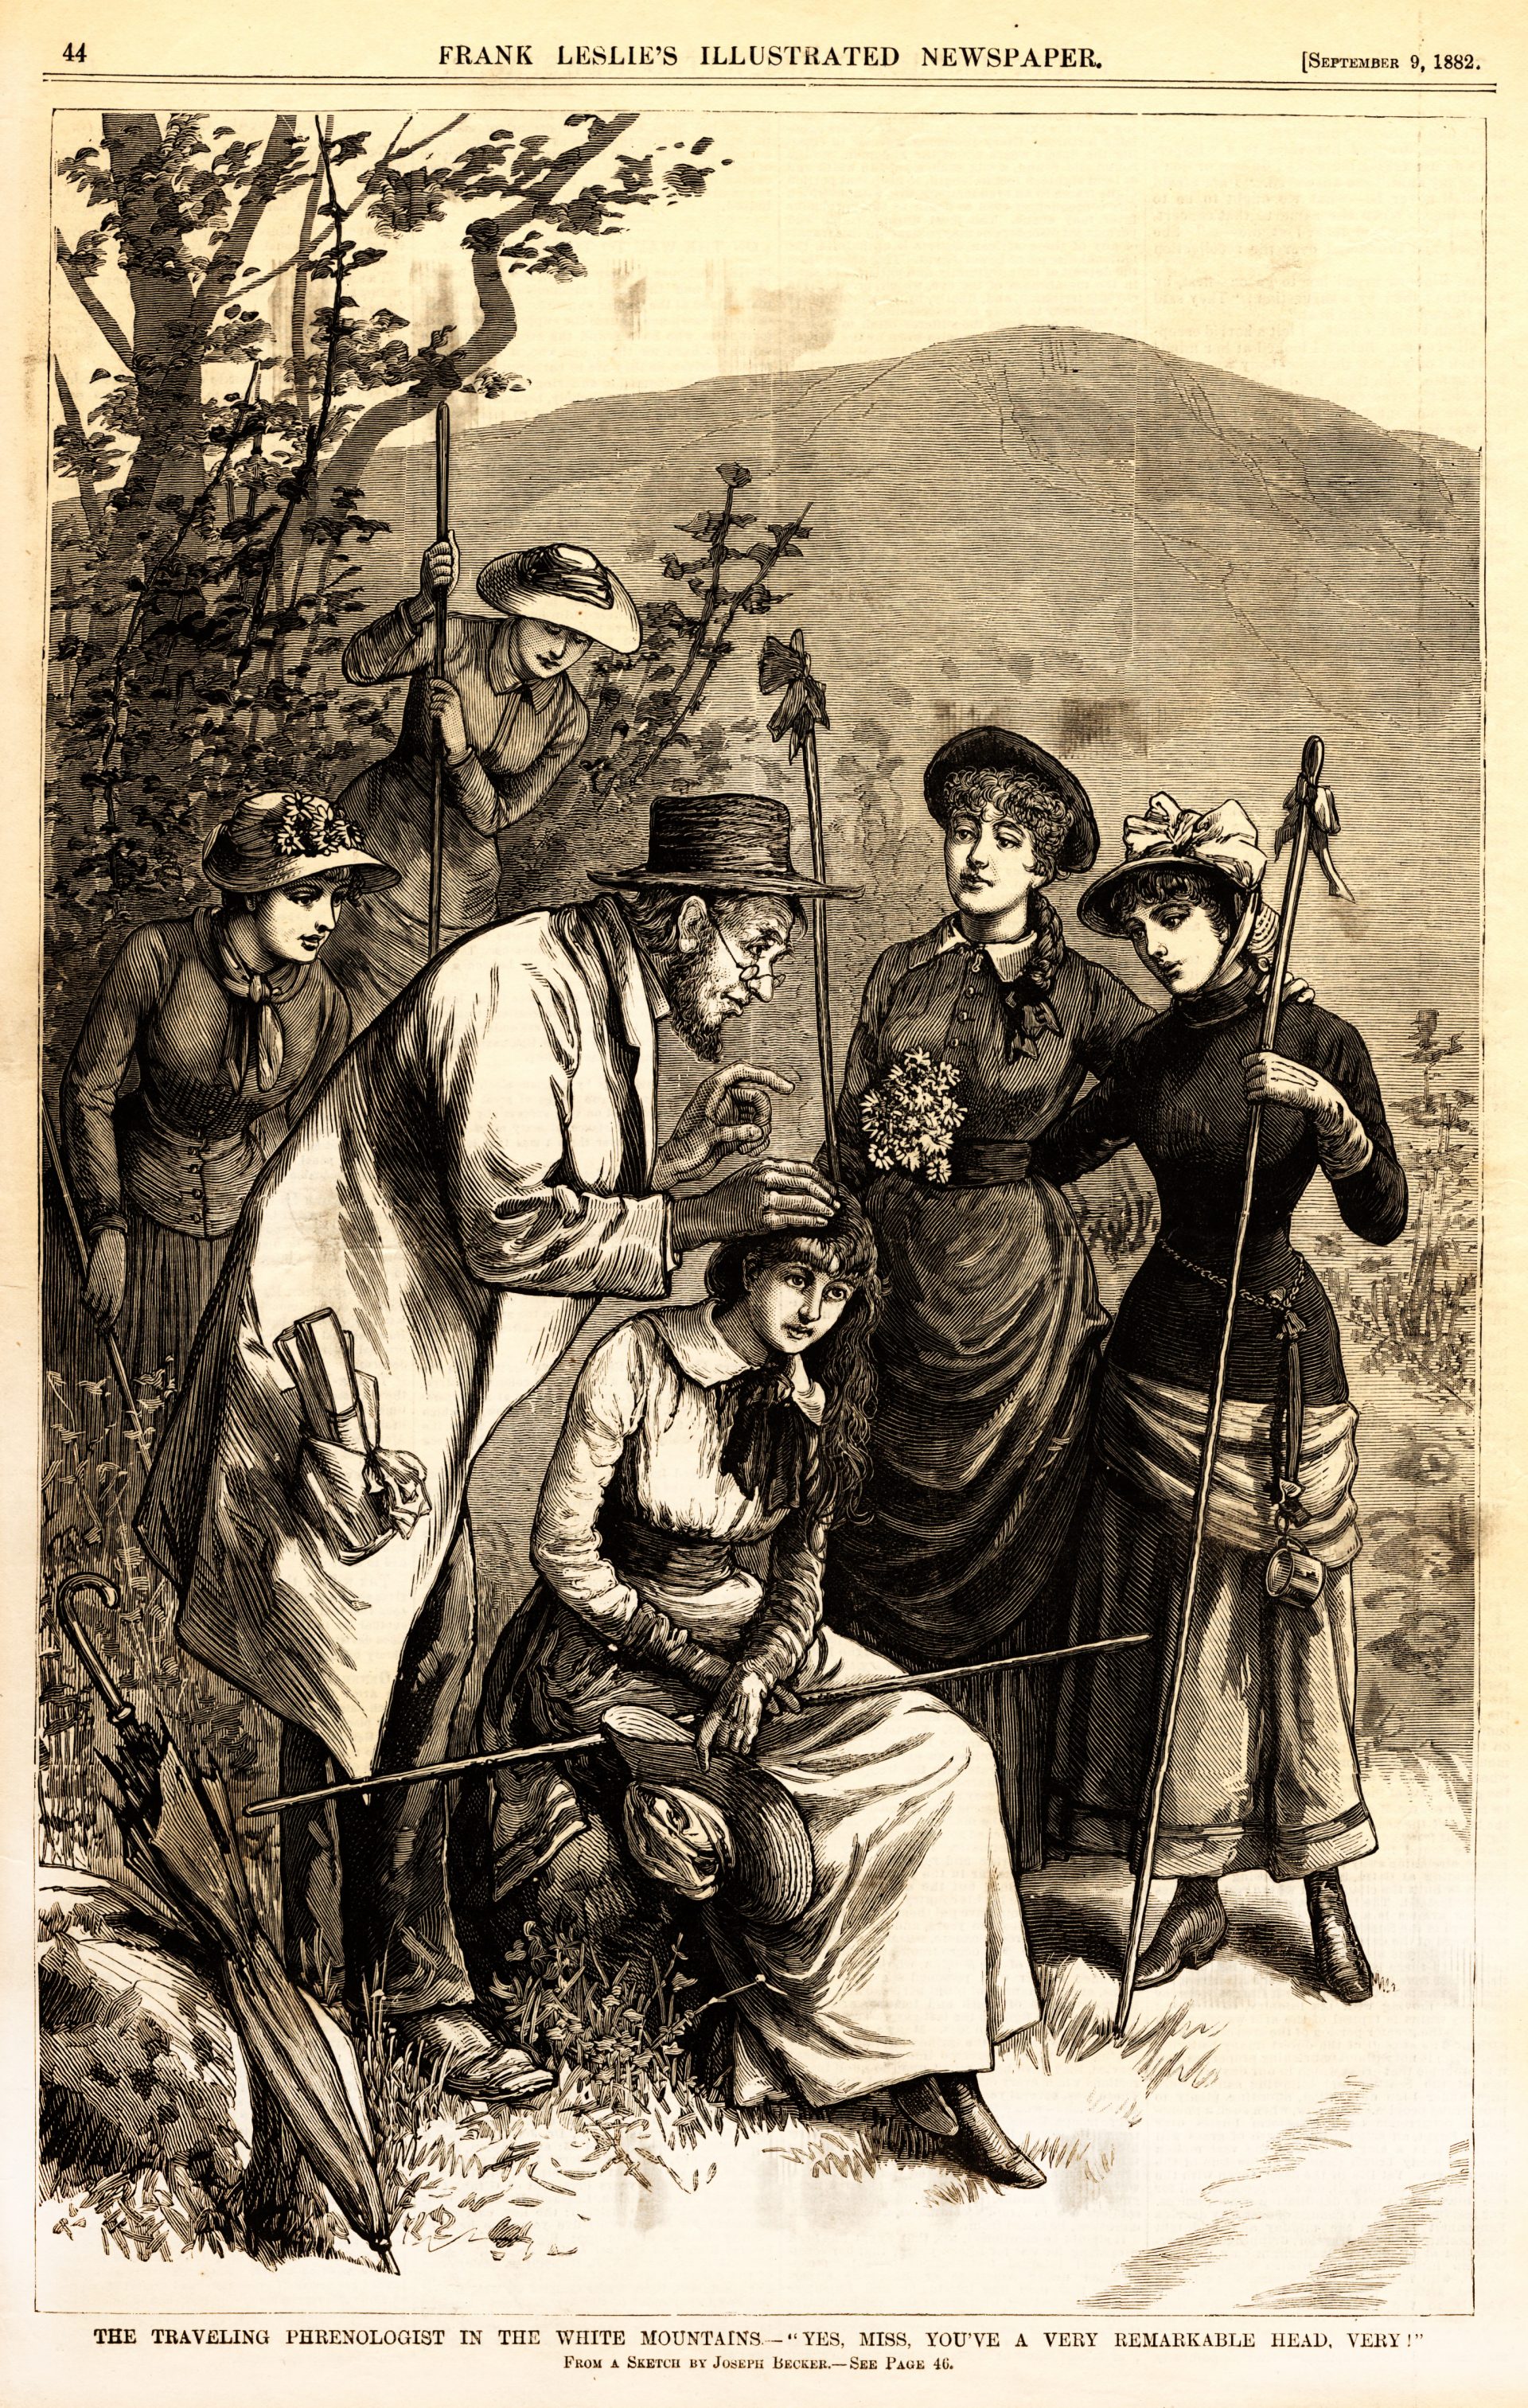 A man in a hat examines a seated woman's head as four other women observe.